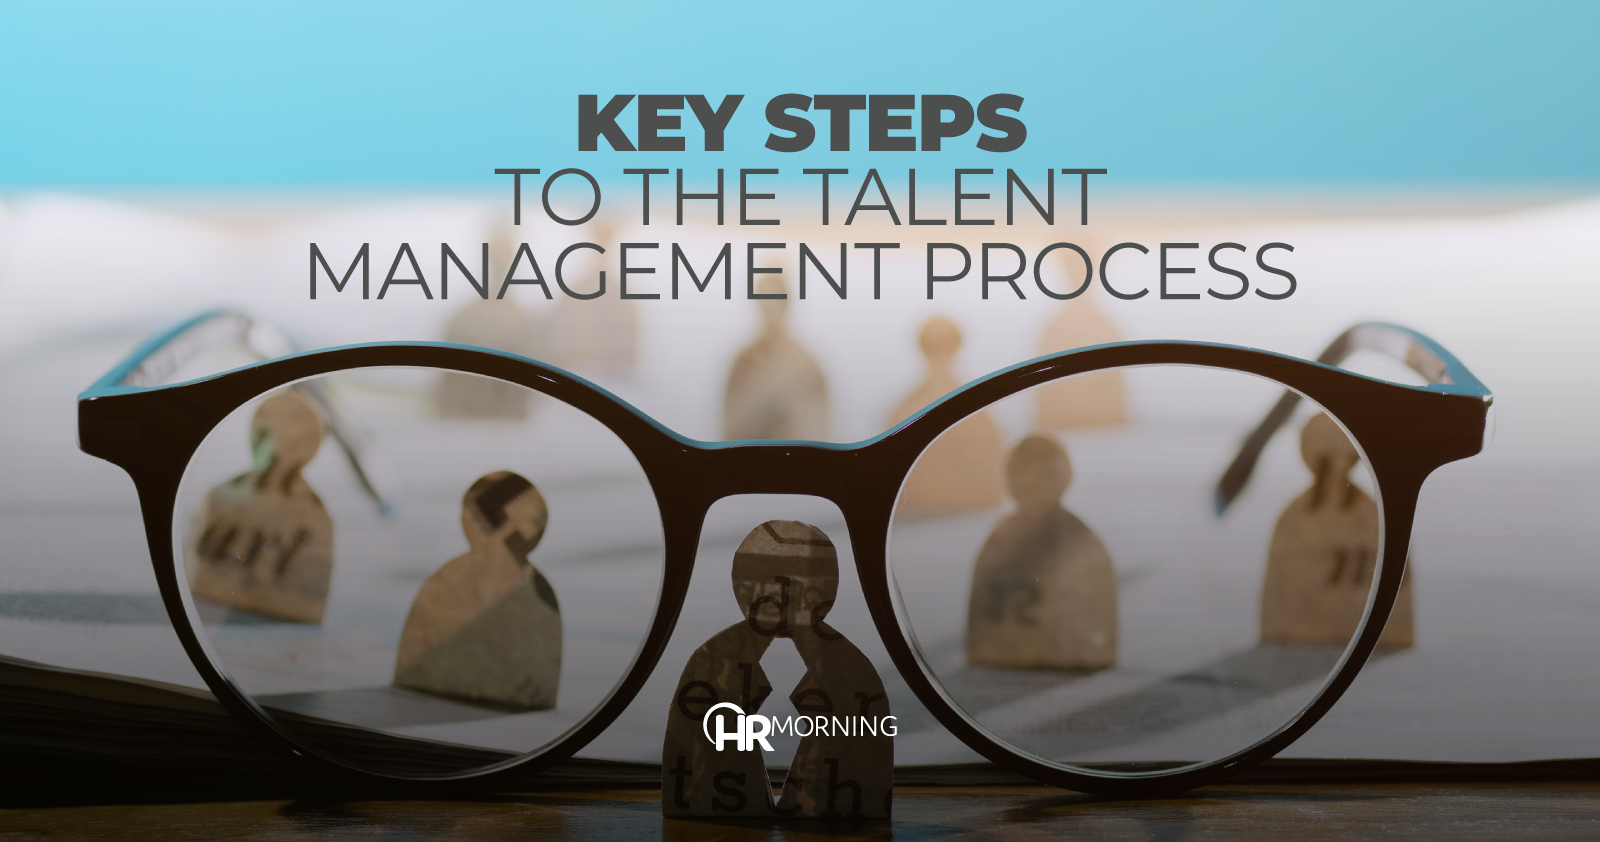 6 key steps to the talent management process